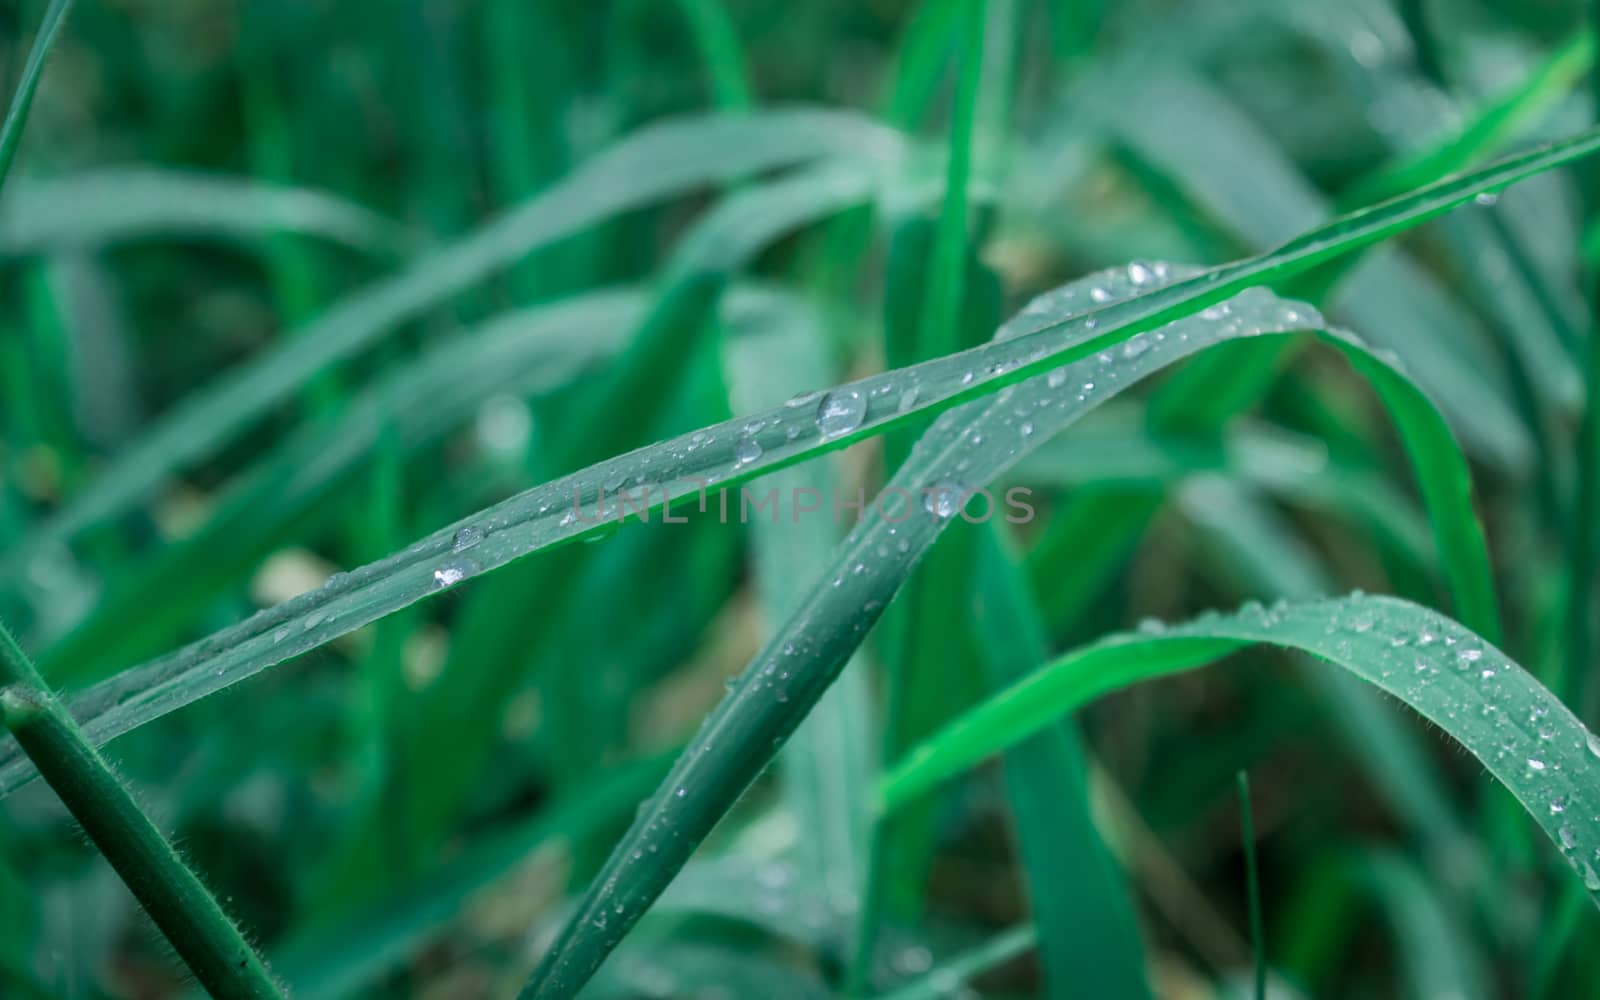 Raindrops on leaf. Close up of rain water dew droplets on grass crop plant. Sunlight reflection. Rural scene in agricultural field lawn meadow. Winter morning rainy season. Beauty in nature background